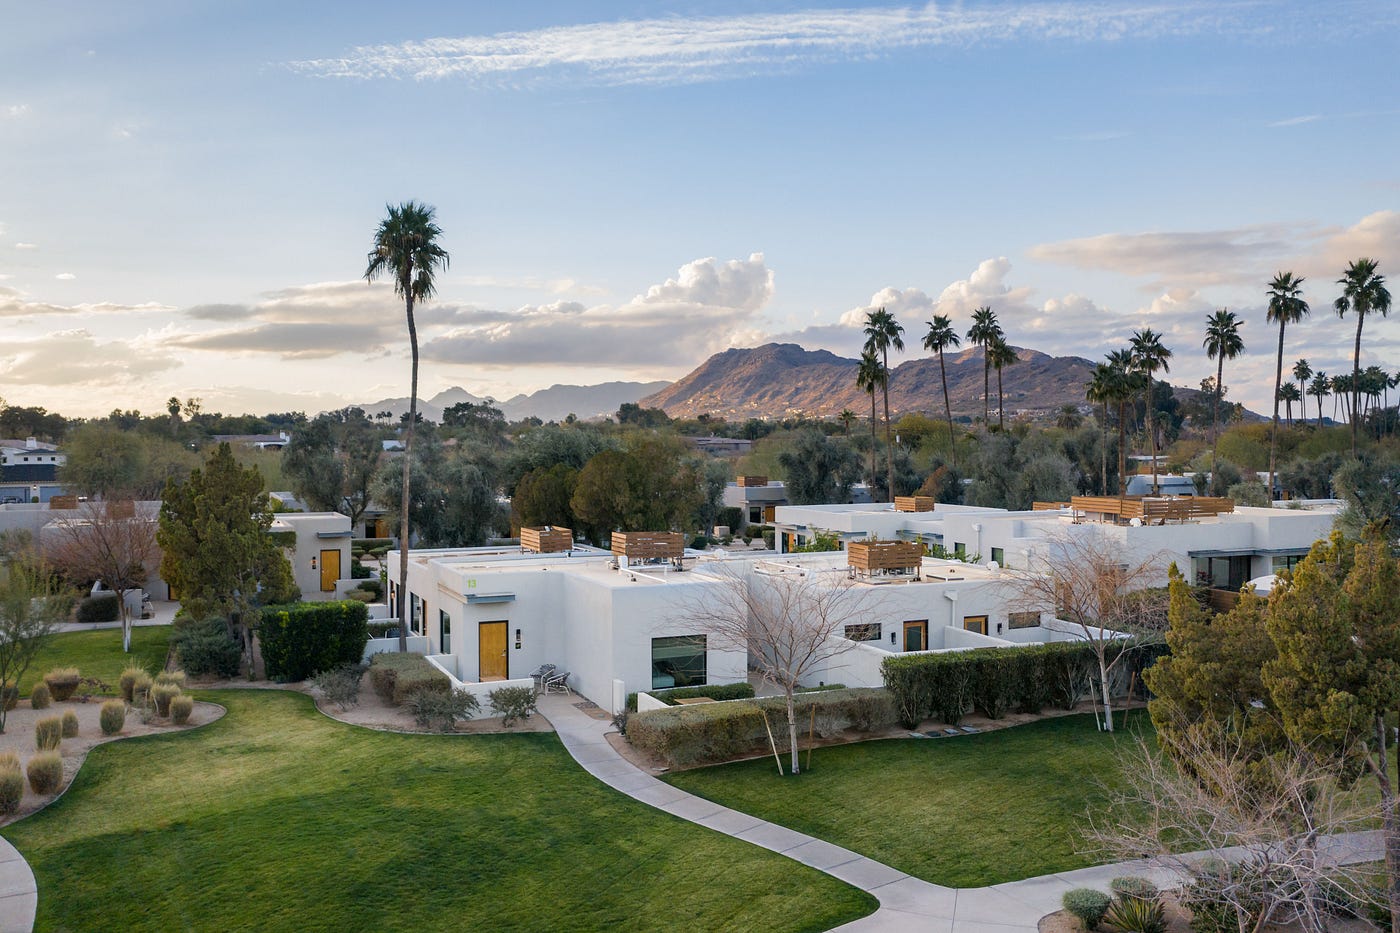 Andaz Scottsdale Resort Presents a Magnificent Sanctuary of Stunning Villas and Suites by Leslie E pic